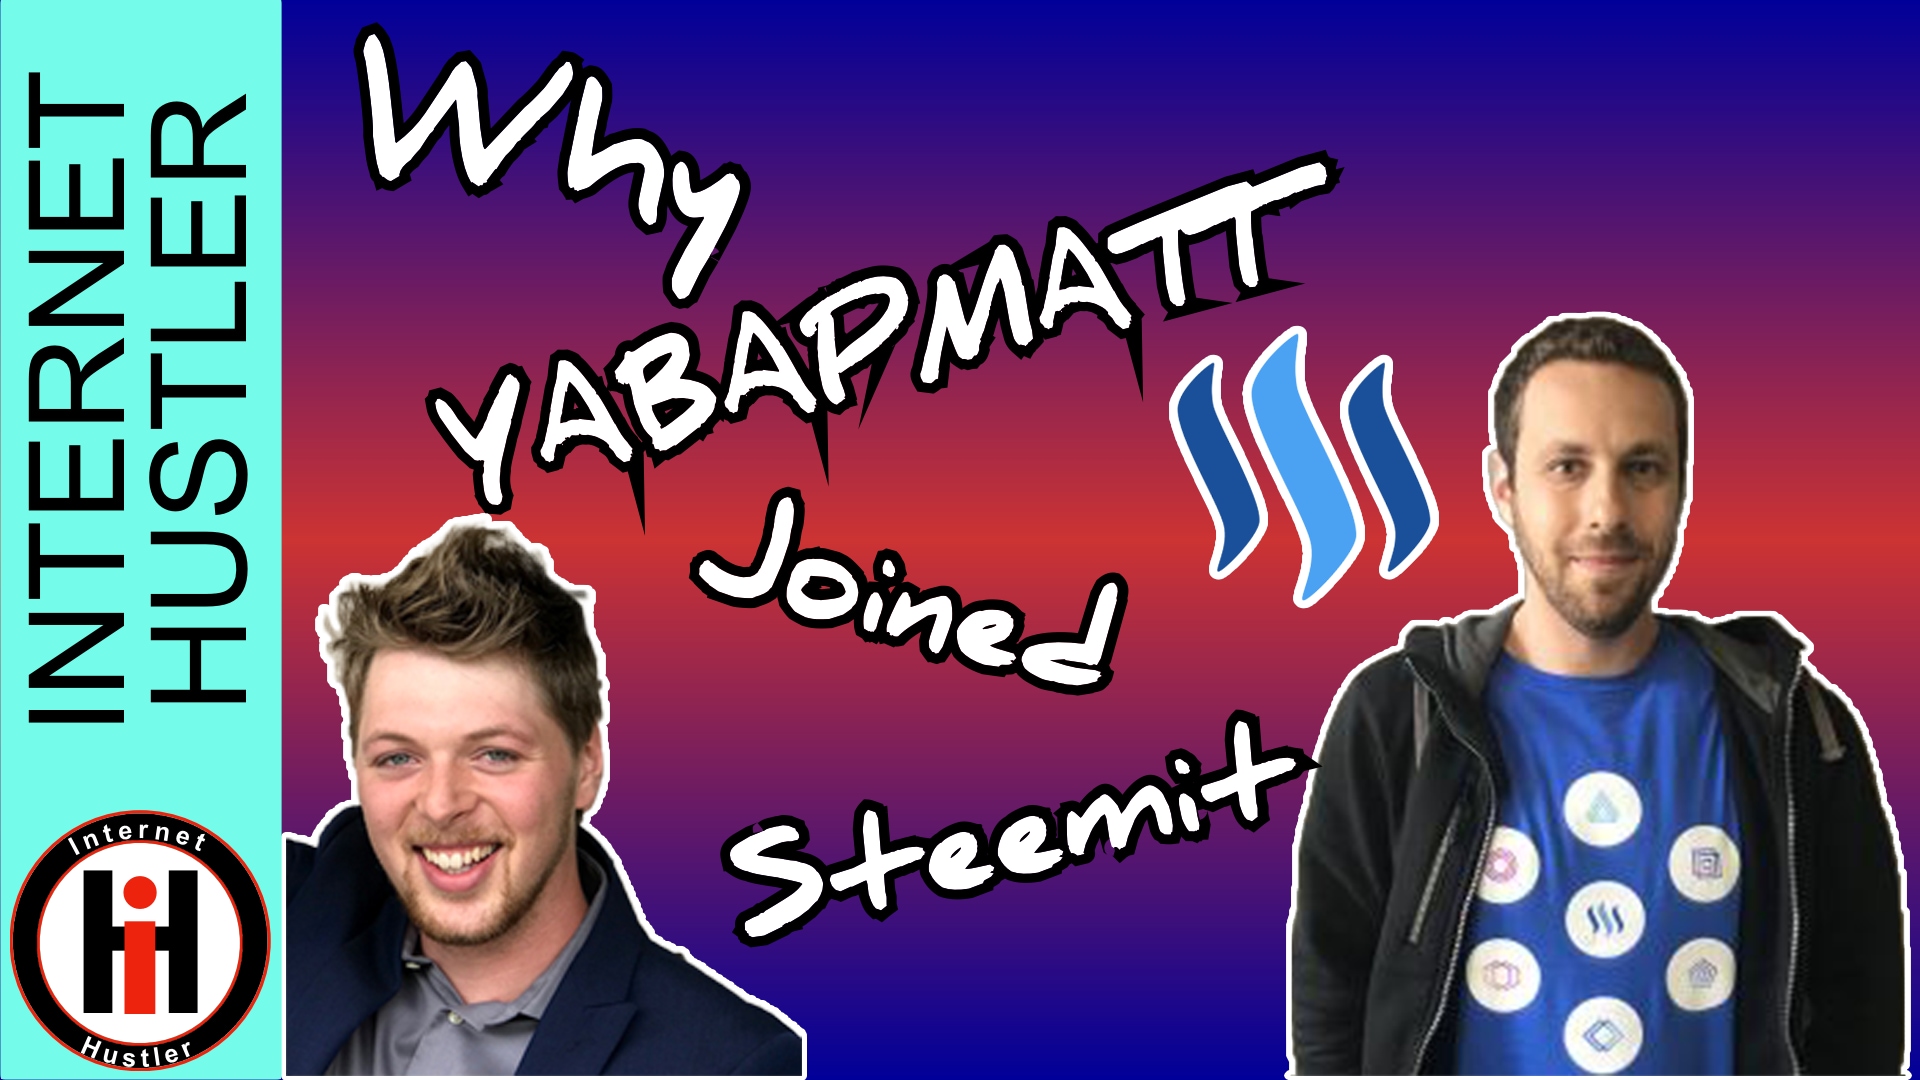 Why Yabapmatt Joined Steemit And You Should Too